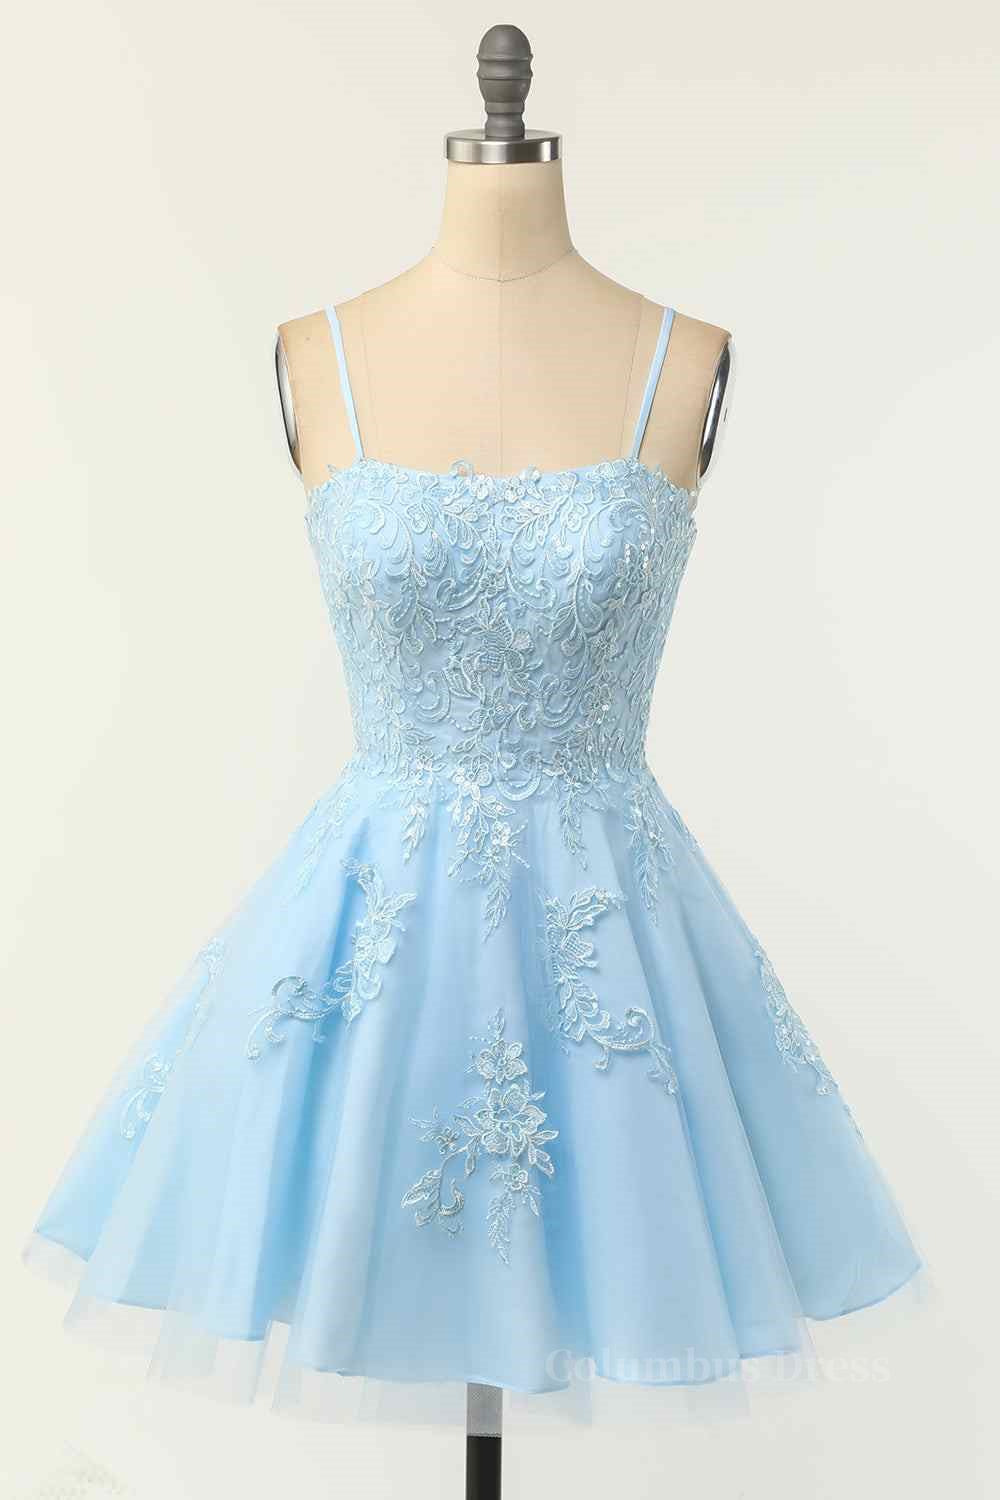 Light Blue A-line Spaghetti Straps Lace-Up Back Applique Mini Corset Homecoming Dress outfit, Strapless Prom Dress